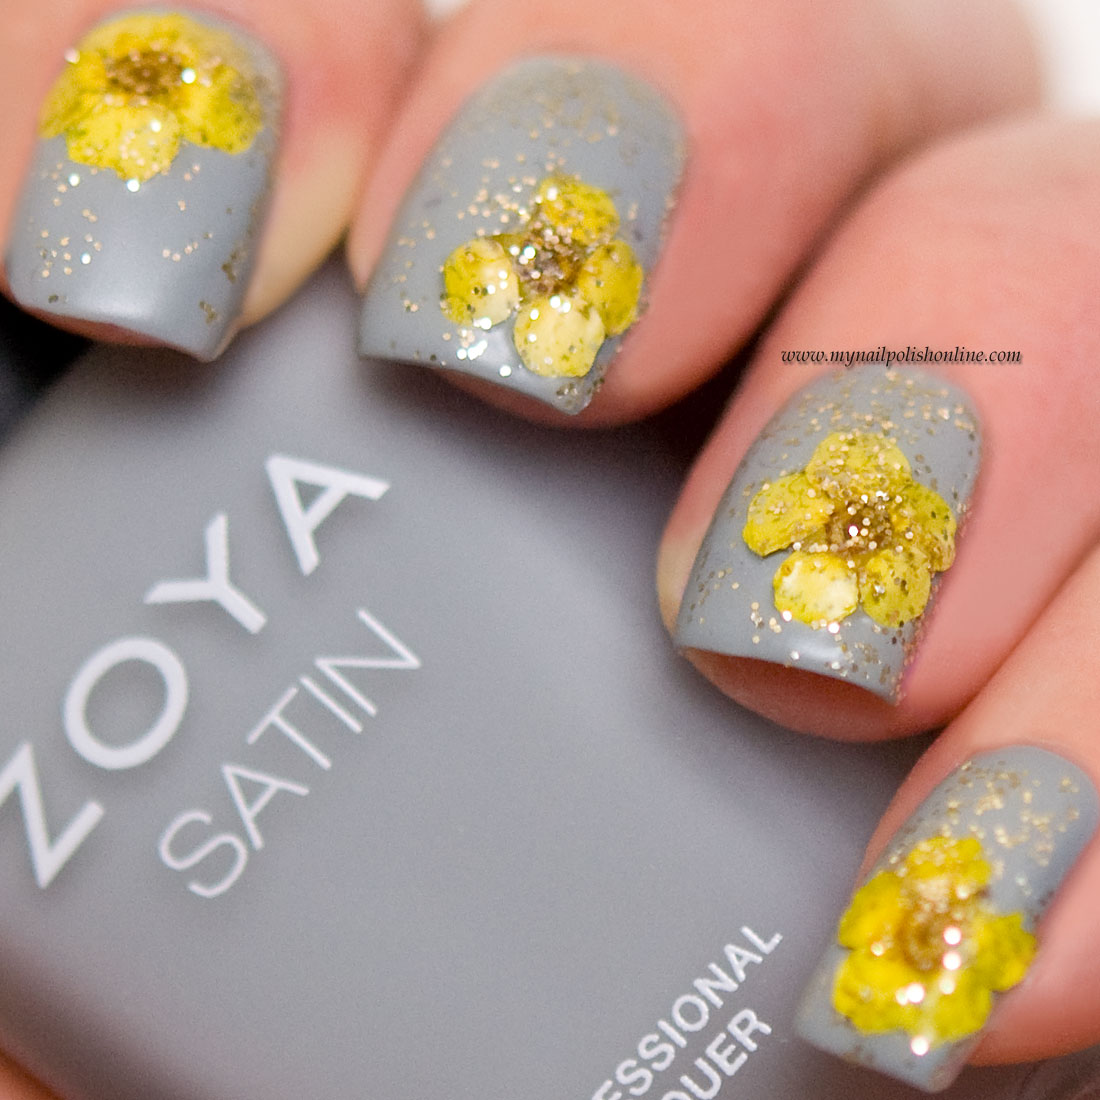 Matte nail art with dried flowers